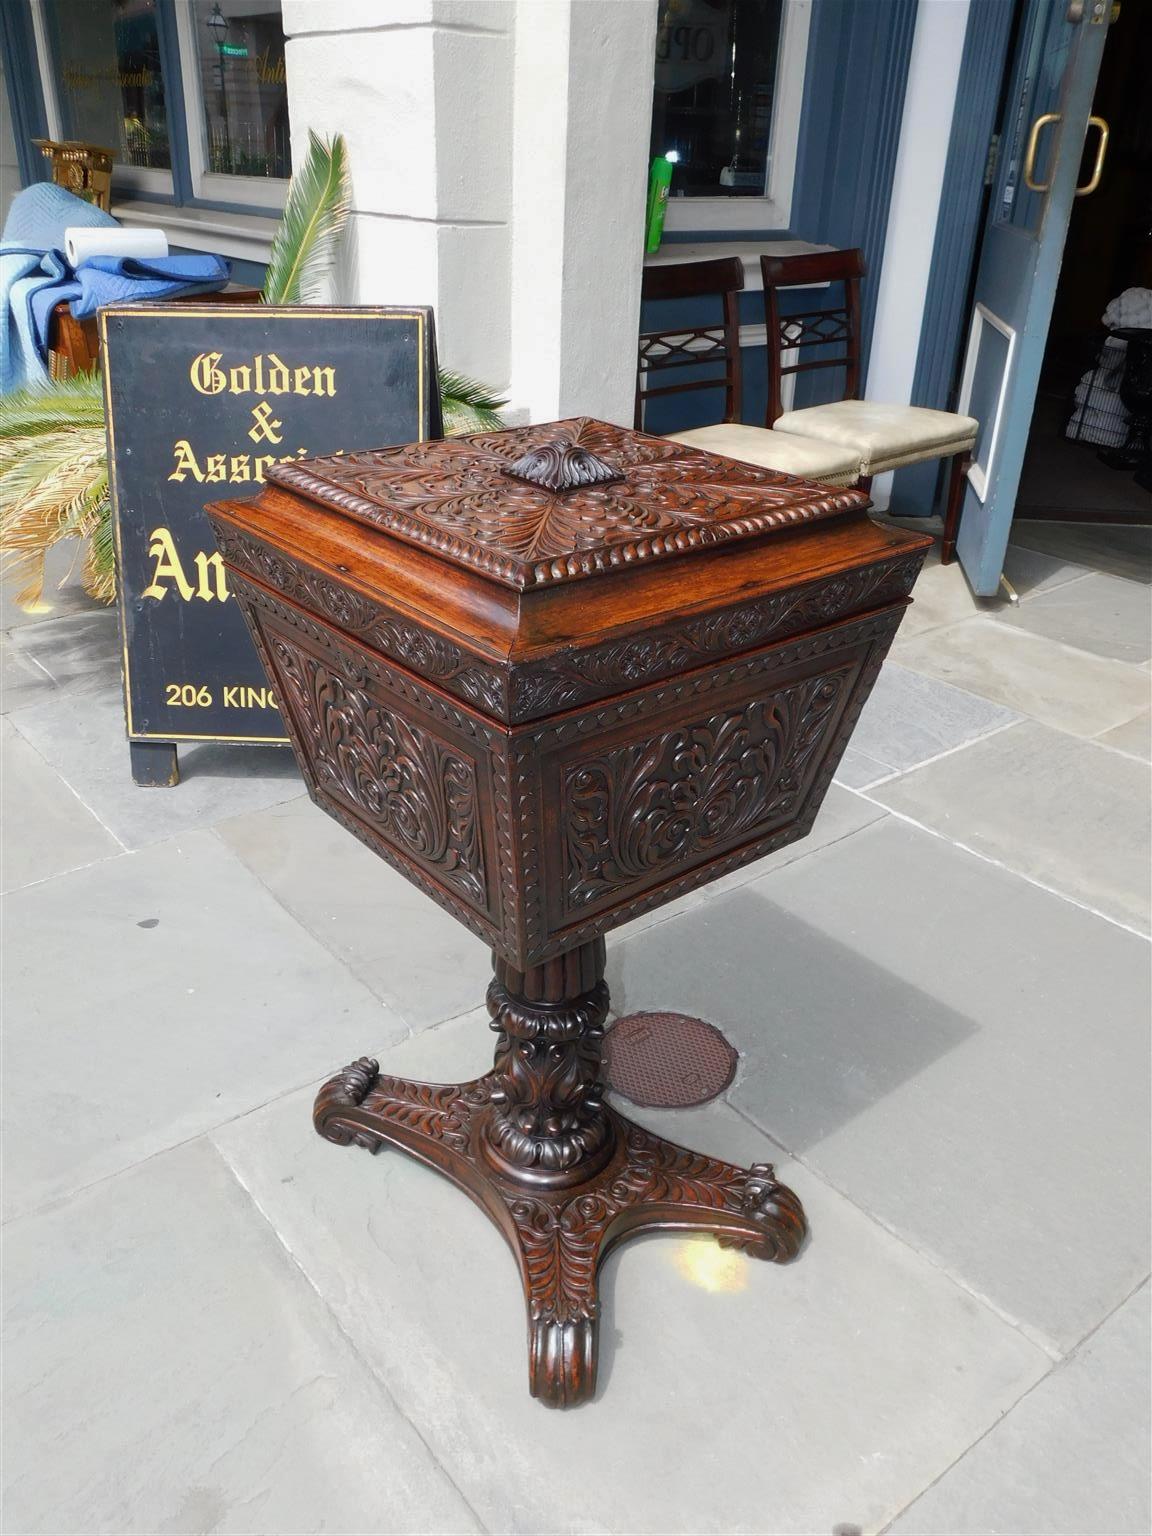 Caribbean mahogany hinged pedestal tea poy with fitted interior, foliate carvings, and resting on the original scrolled feet. Early 19th century.